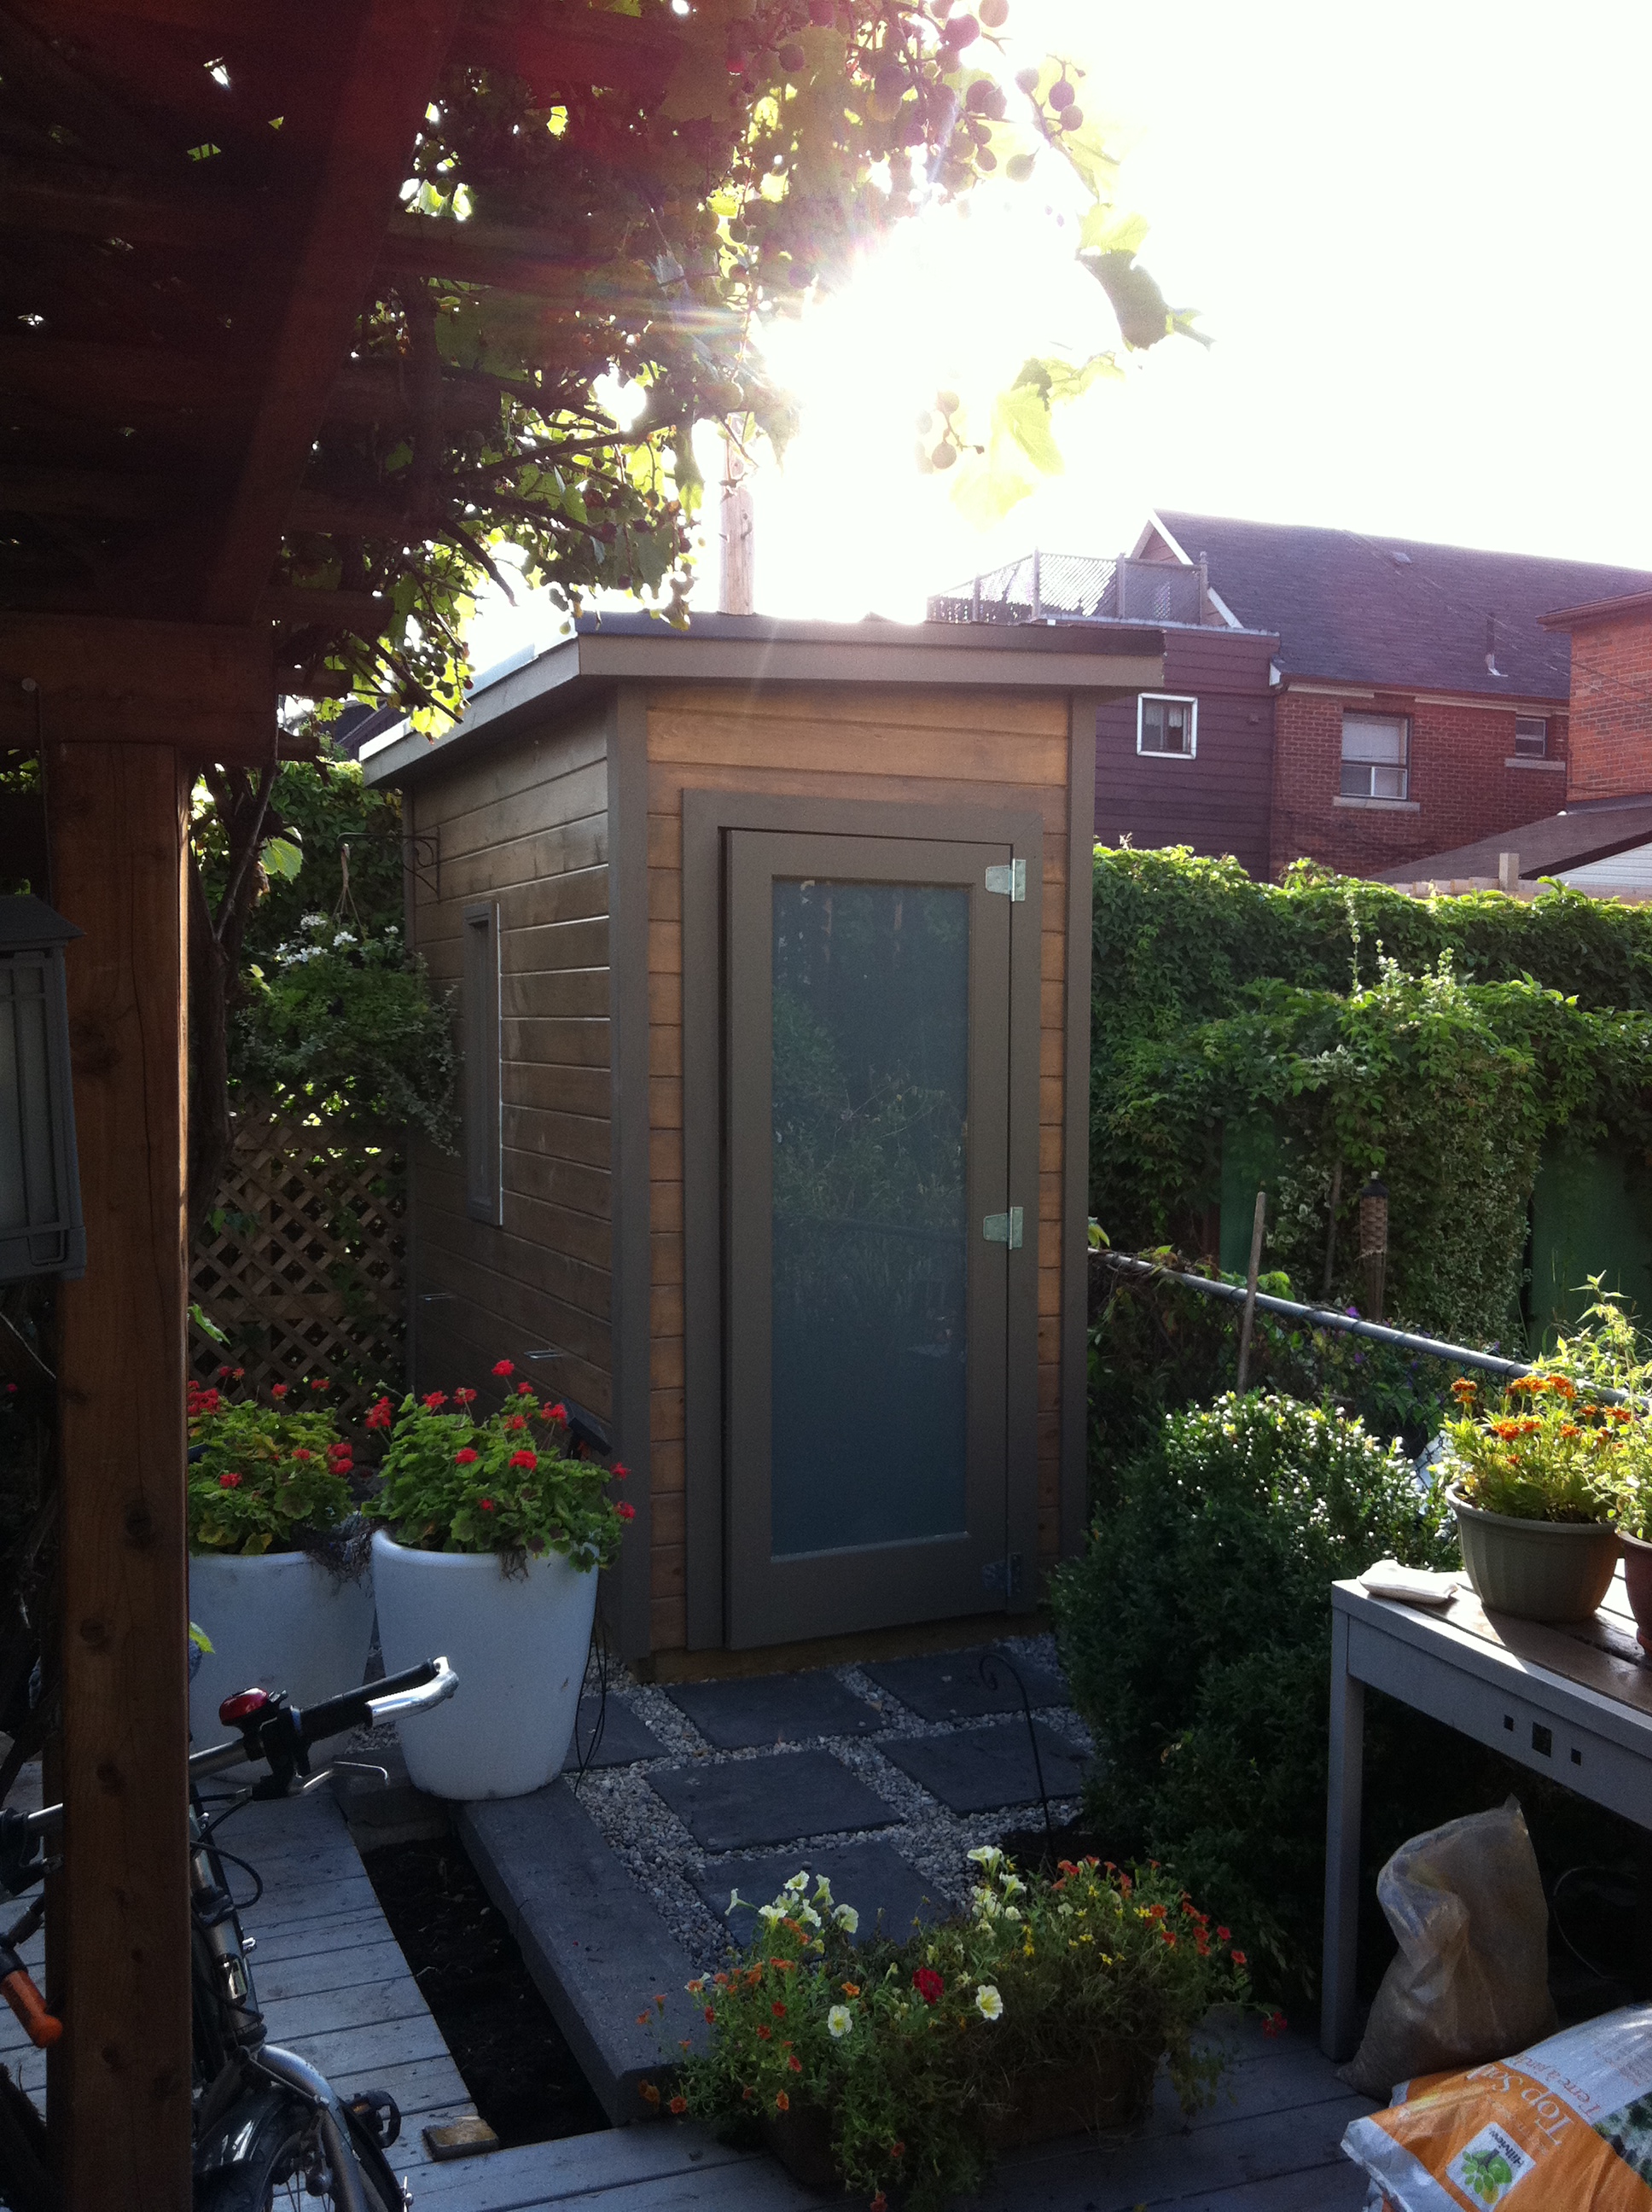 Garden Shed Plans Ontario Plans plans for toy machine shed Â» ))@ How 